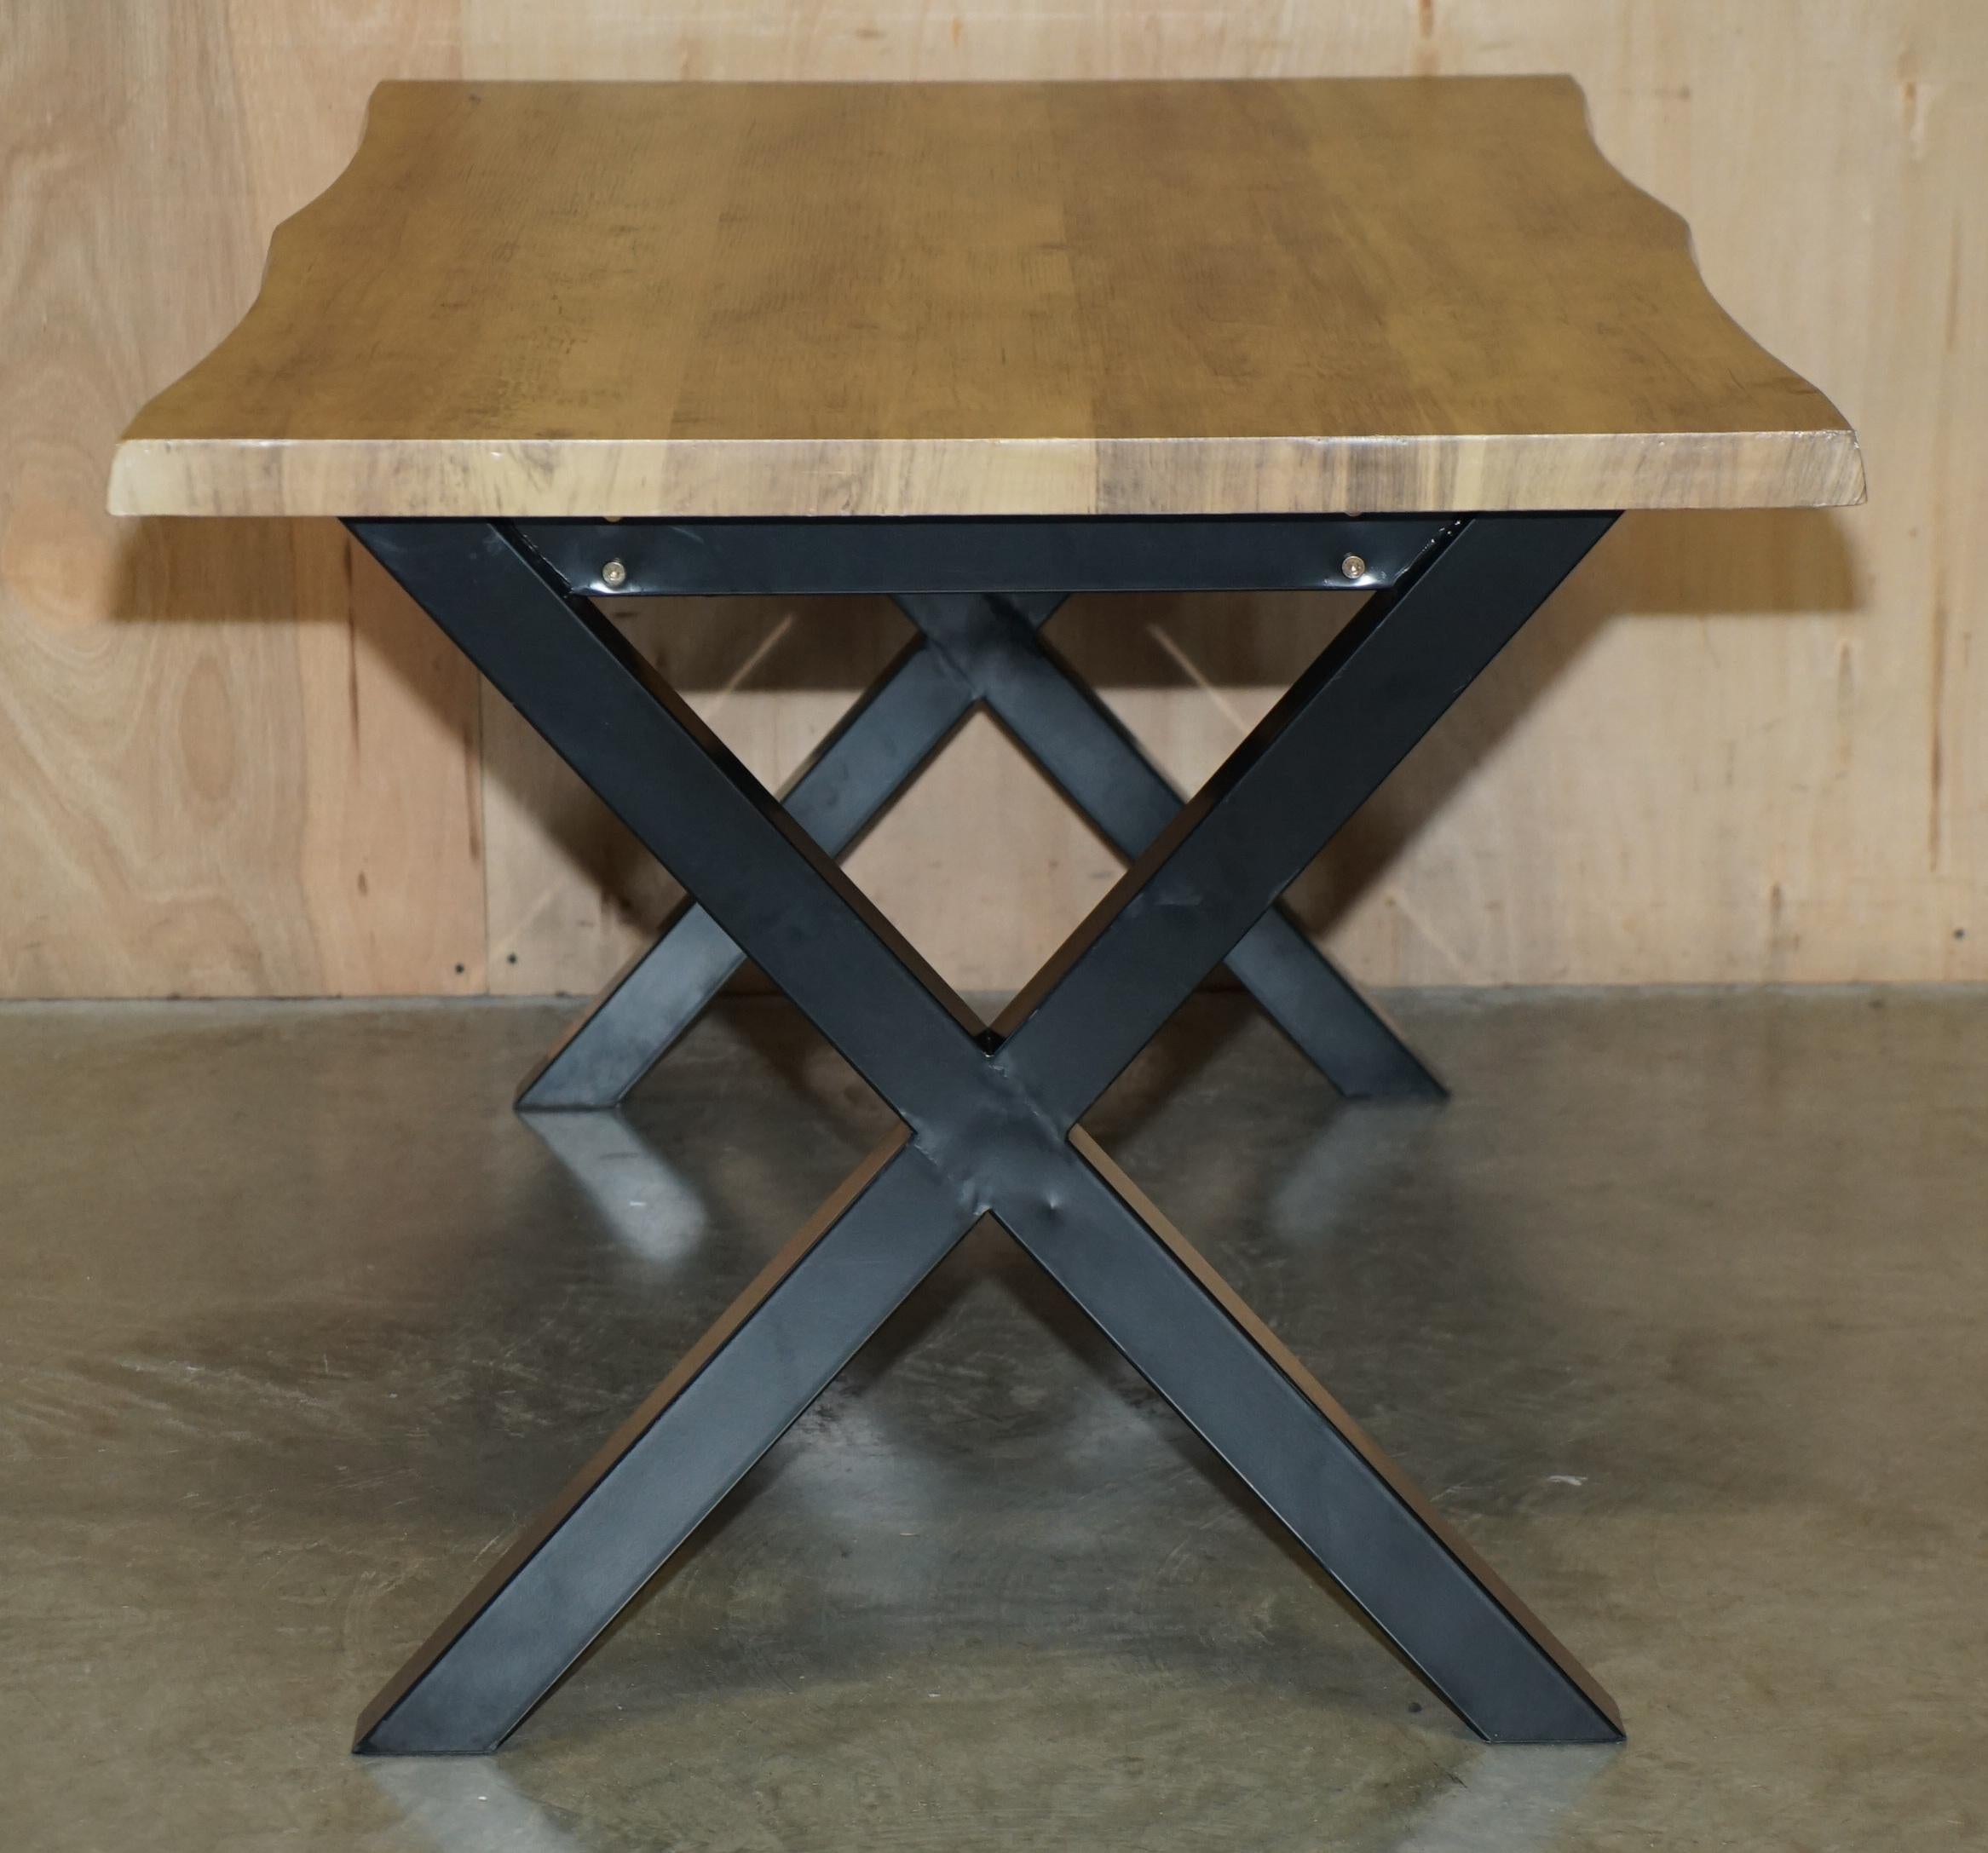 DECORATIVE CONTEMPORARY X FRAMED DINING TABLE & BENCHES PART OF A DiNING SUITE For Sale 1